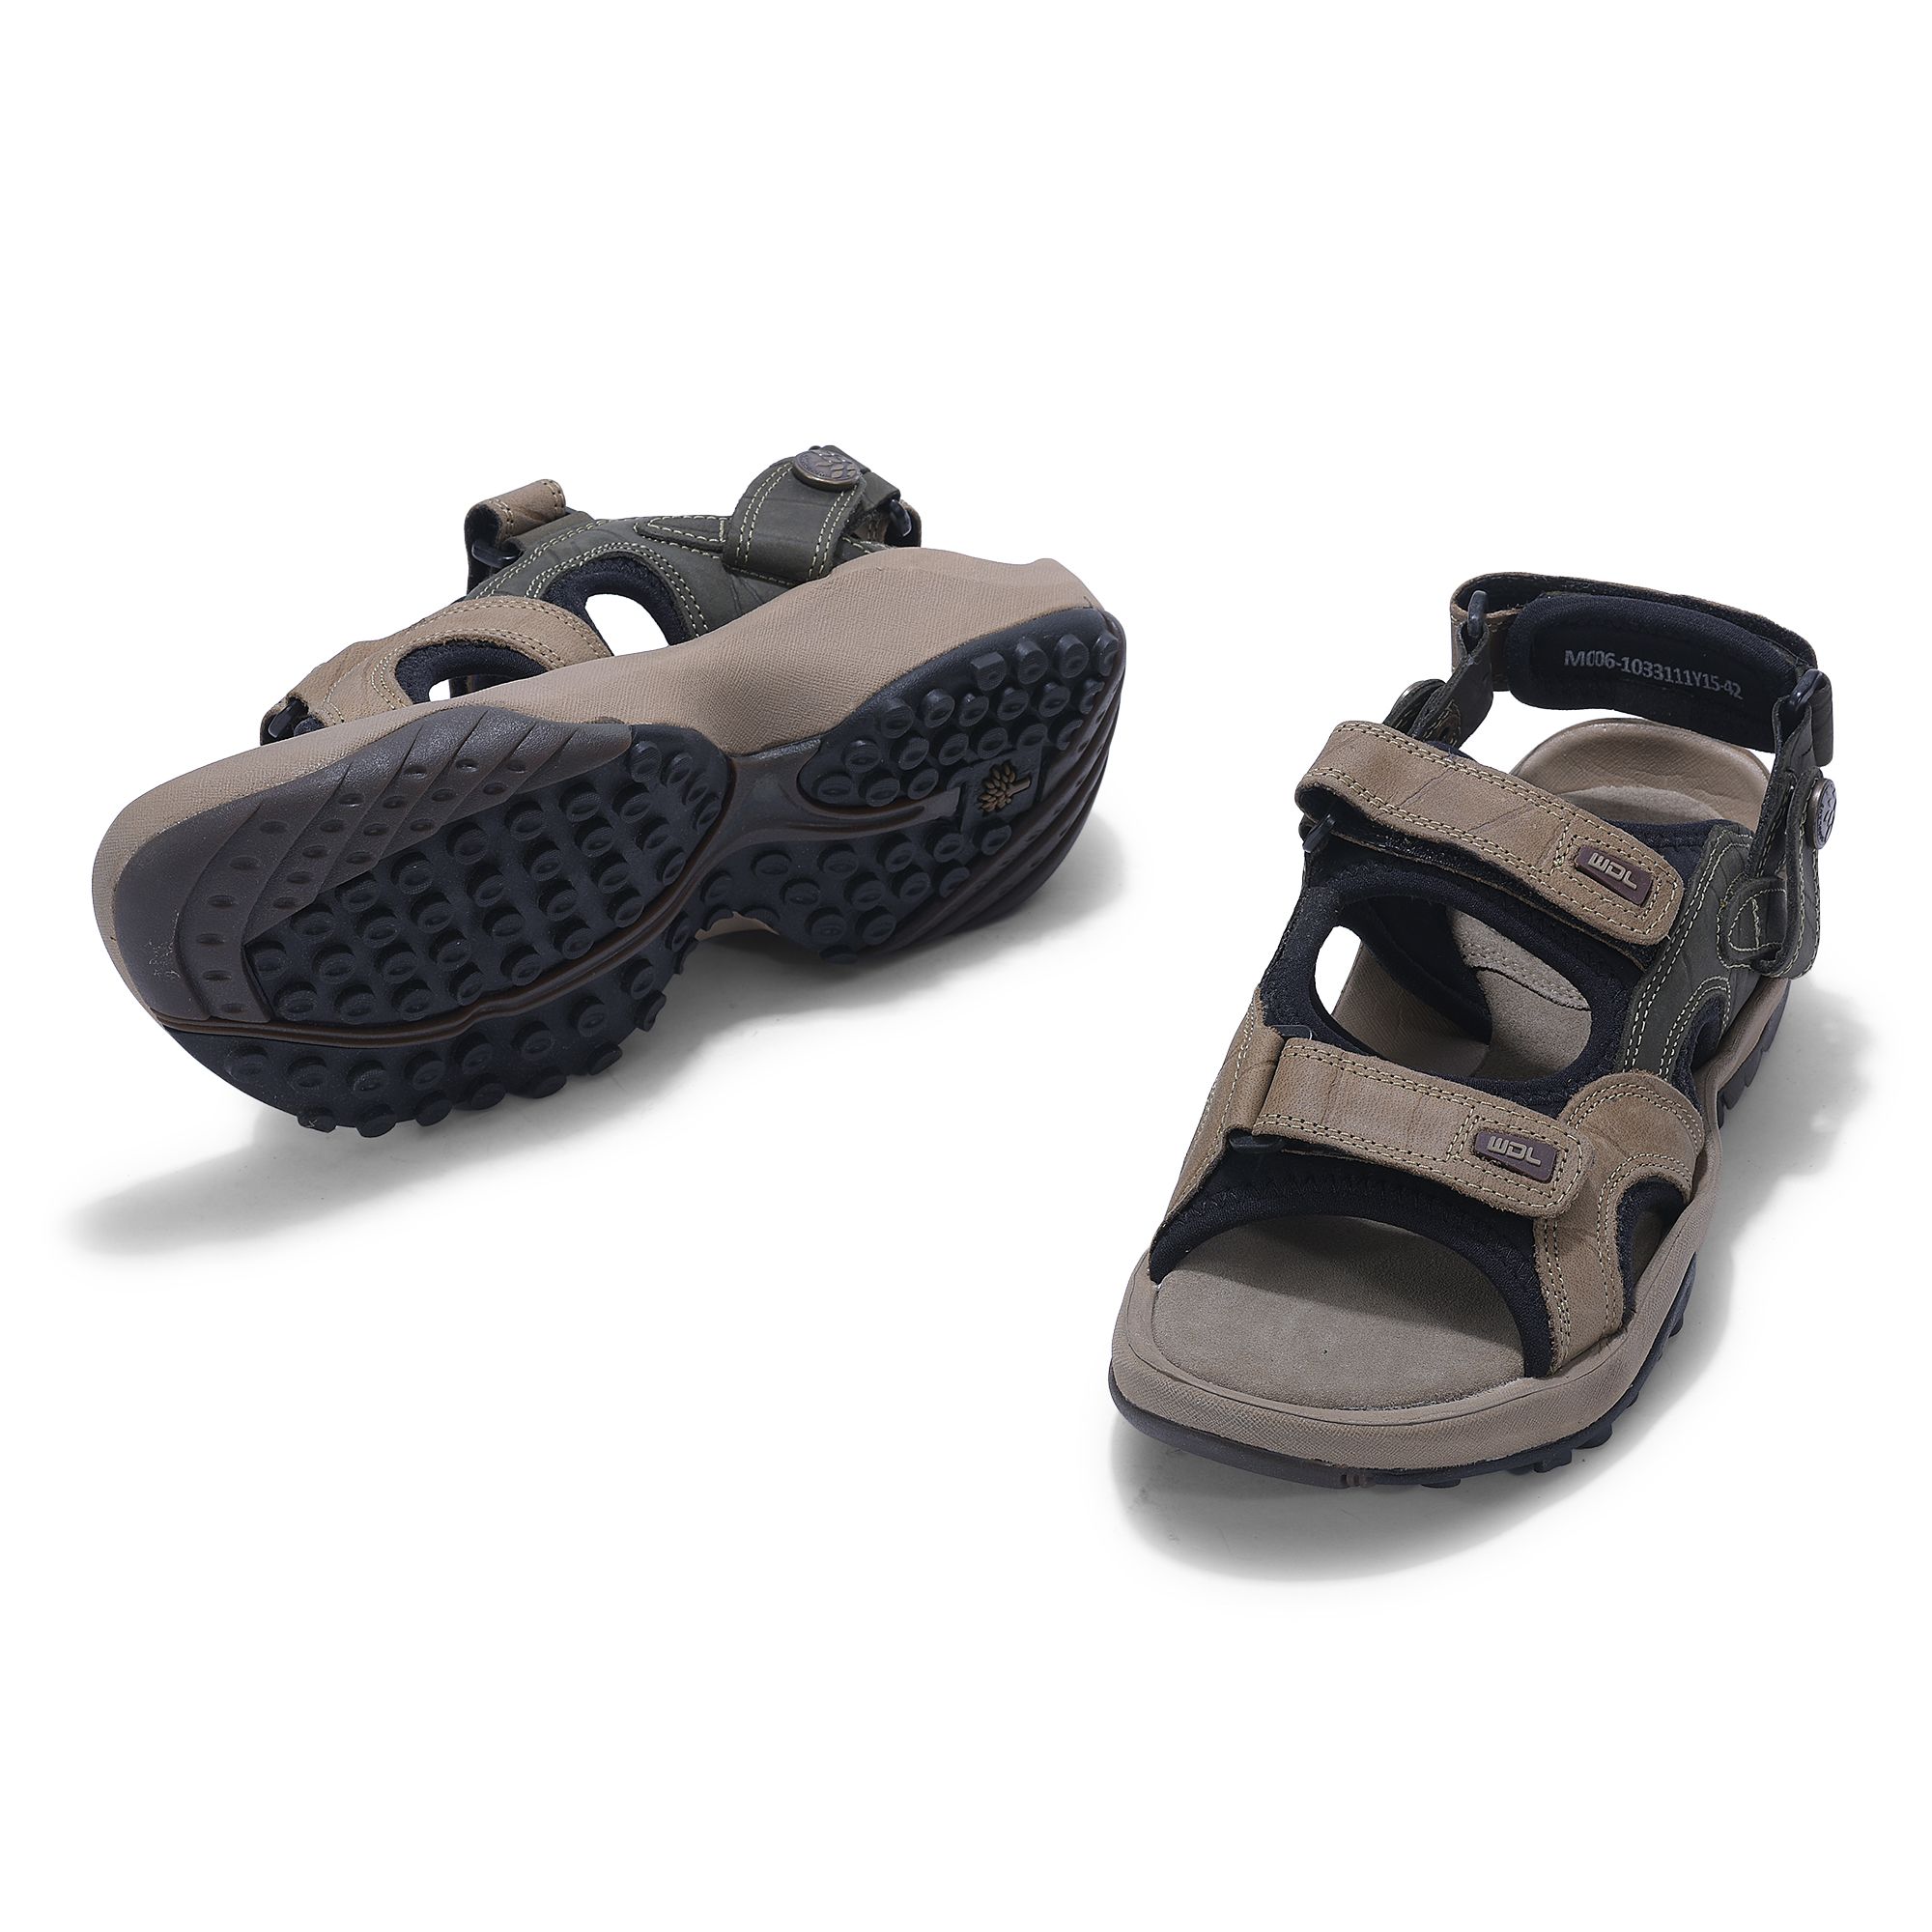 Men's Leather Hiking Sandals NH500